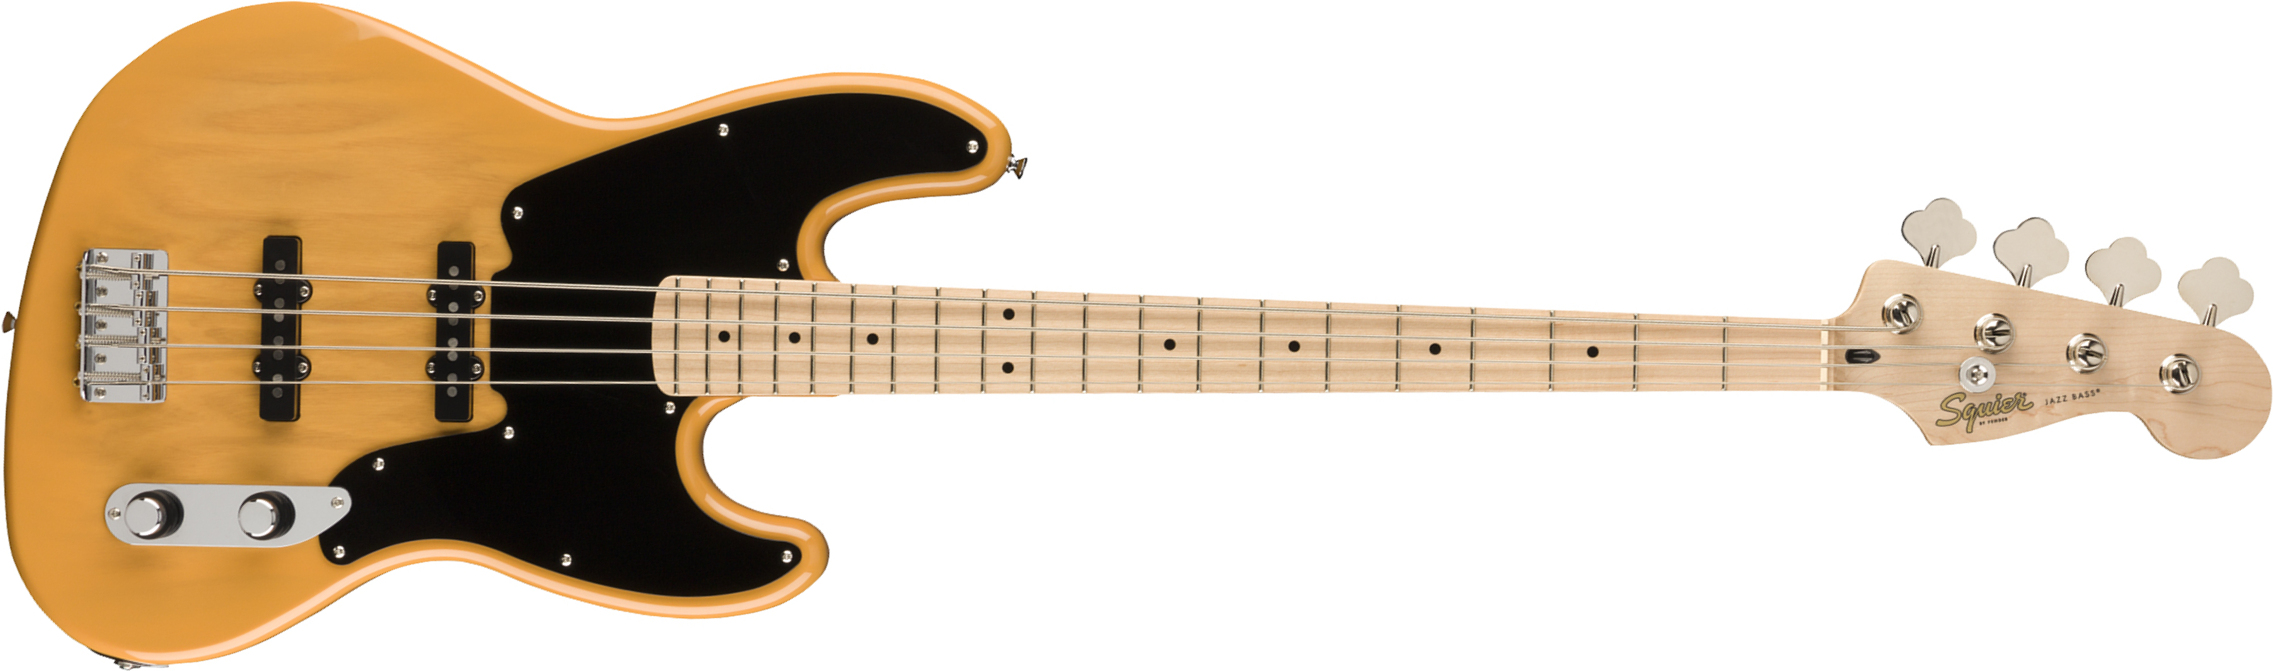 Squier Jazz Bass 1954 Paranormal Mn - Butterscotch Blonde - Solid body electric bass - Main picture